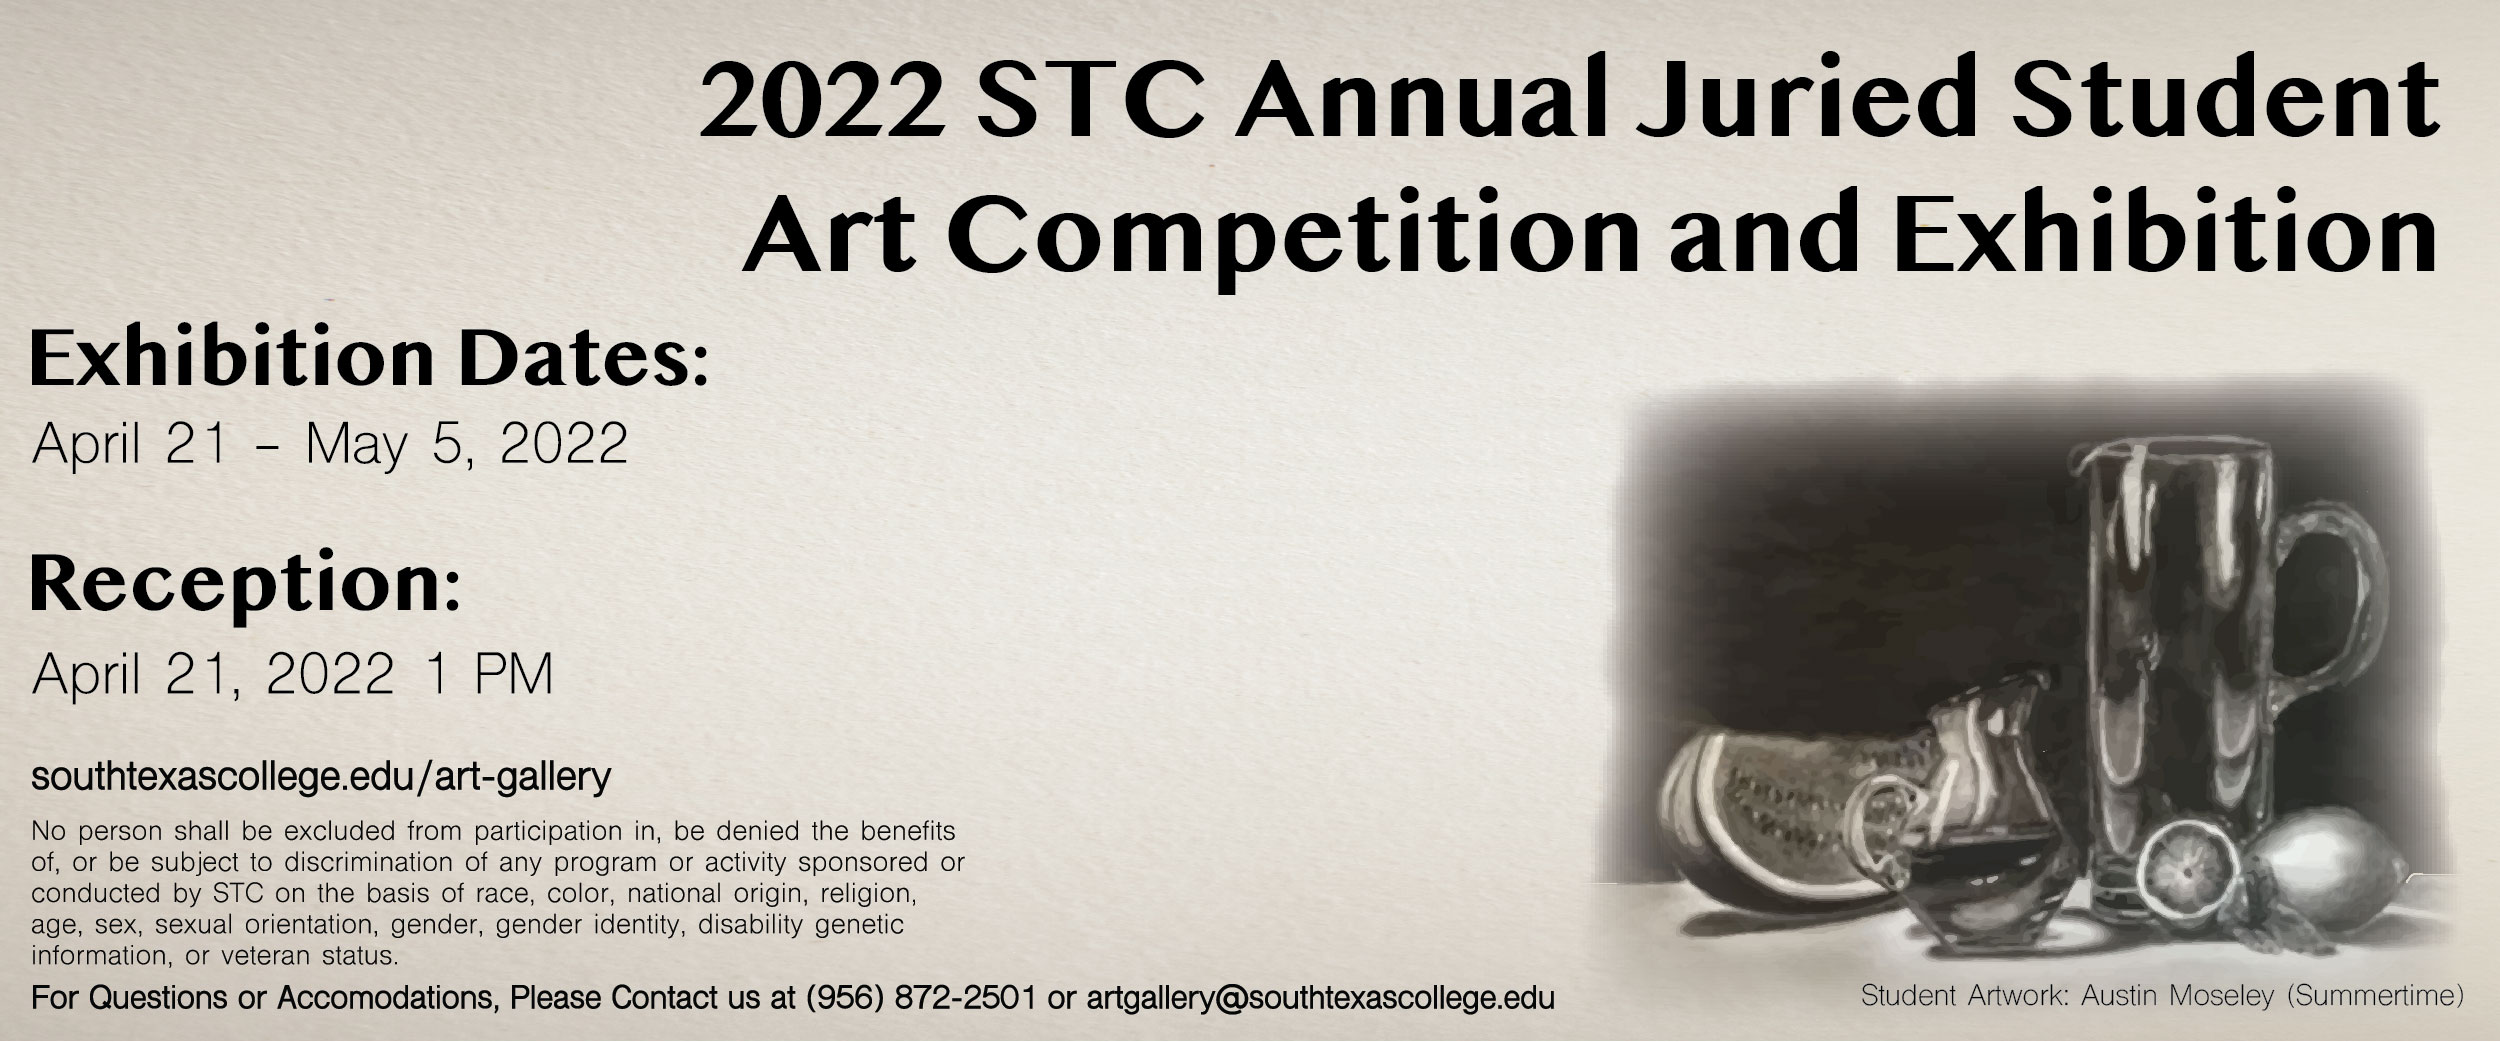 2022 STC Annual Juried Student Art Competition and Exhibition